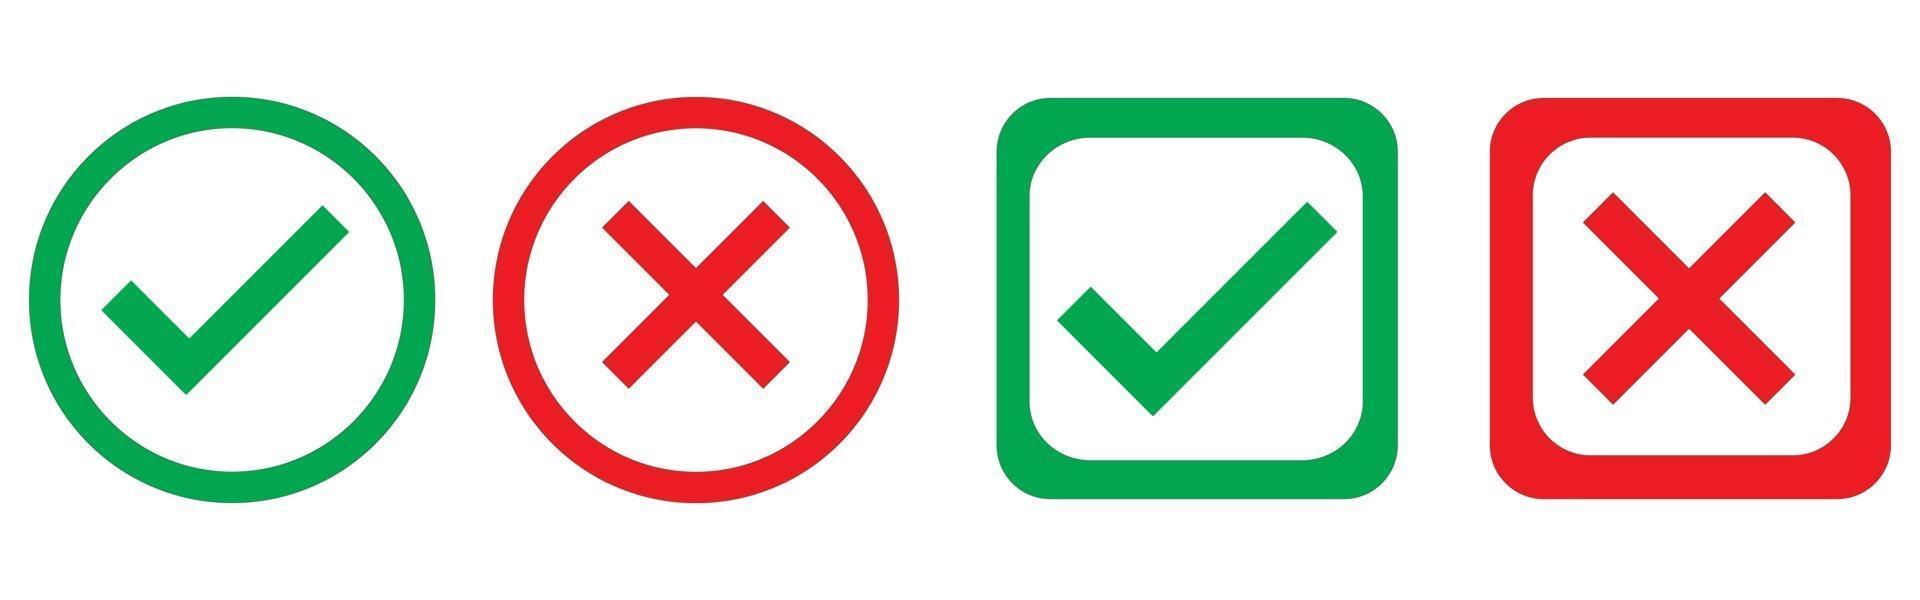 Check mark and x set icon. Simple web buttons. vector